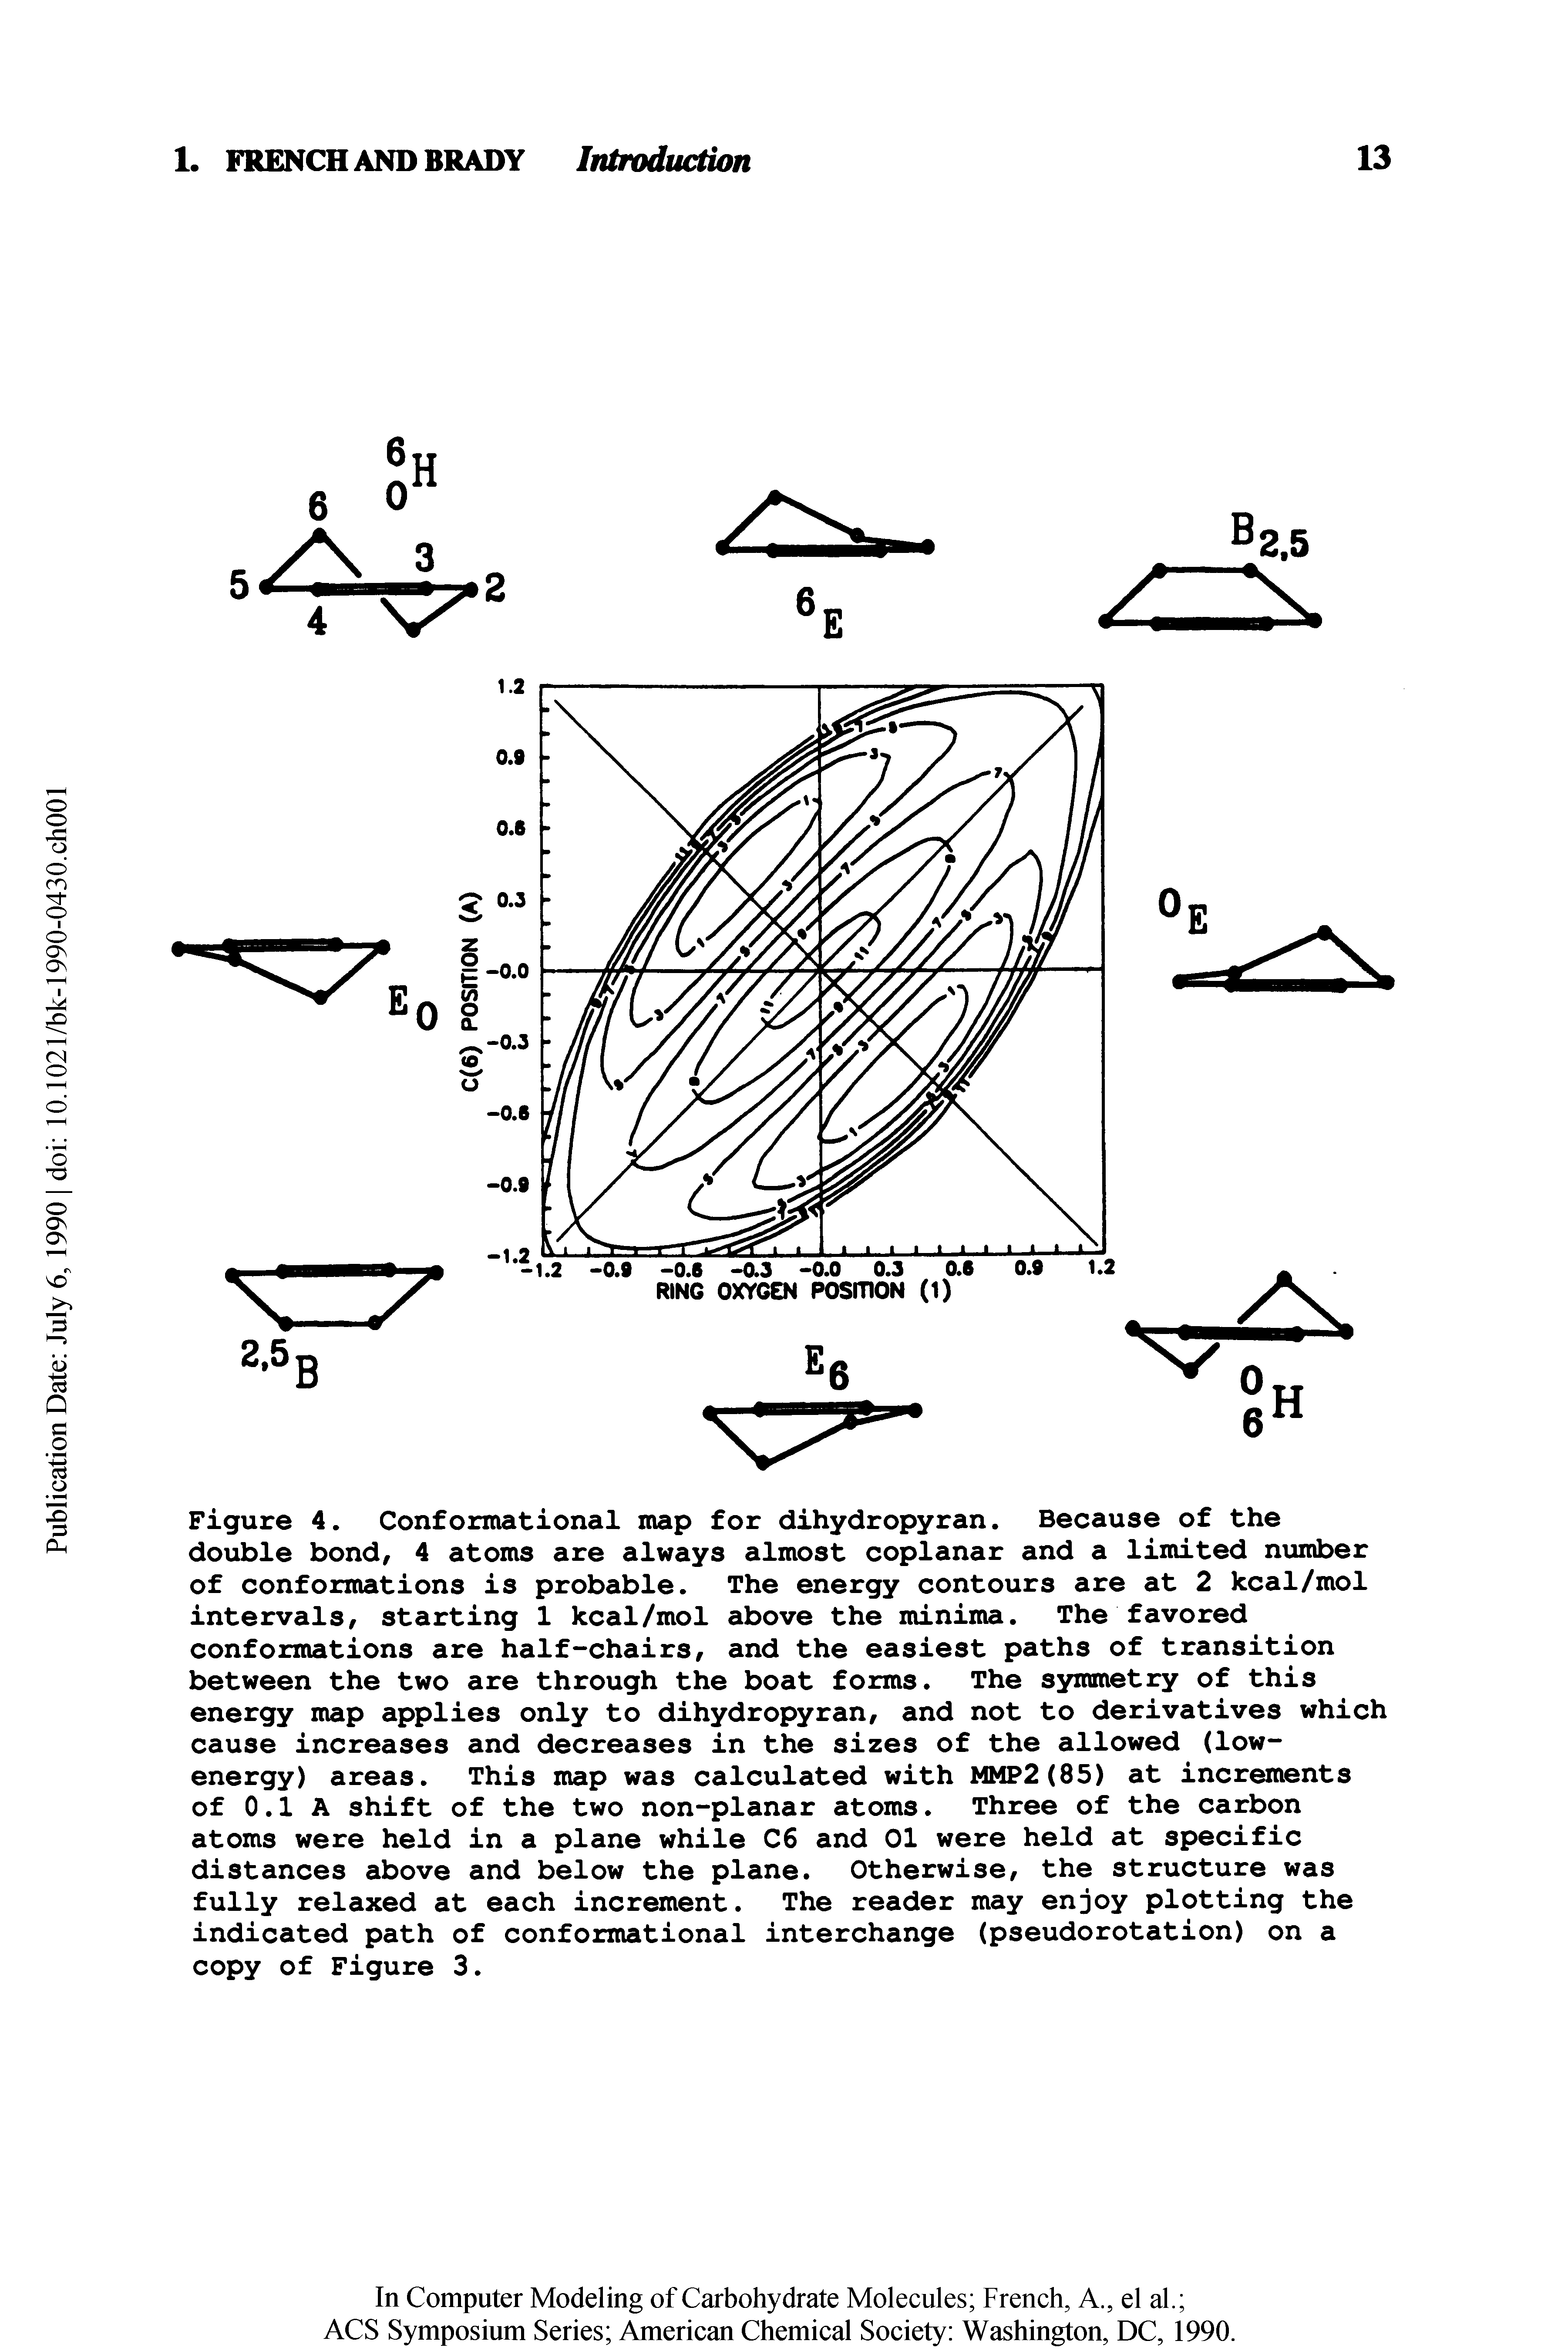 Figure 4. Conformational map for dihydropyran. Because of the double bond, 4 atoms are always almost coplanar and a limited number of conformations is probable. The energy contours are at 2 kcal/mol intervals, starting 1 kcal/mol above the minima. The favored conformations are half-chairs, and the easiest paths of transition between the two are through the boat forms. The symmetry of this energy map applies only to dihydropyran, and not to derivatives which cause increases and decreases in the sizes of the allowed (low-energy) areas. This map was calculated with MMP2(85) at increments of 0.1 A shift of the two non-planar atoms. Three of the carbon atoms were held in a plane while C6 and 01 were held at specific distances above and below the plane. Otherwise, the structure was fully relaxed at each increment. The reader may enjoy plotting the indicated path of conformational interchange (pseudorotation) on a copy of Figure 3.